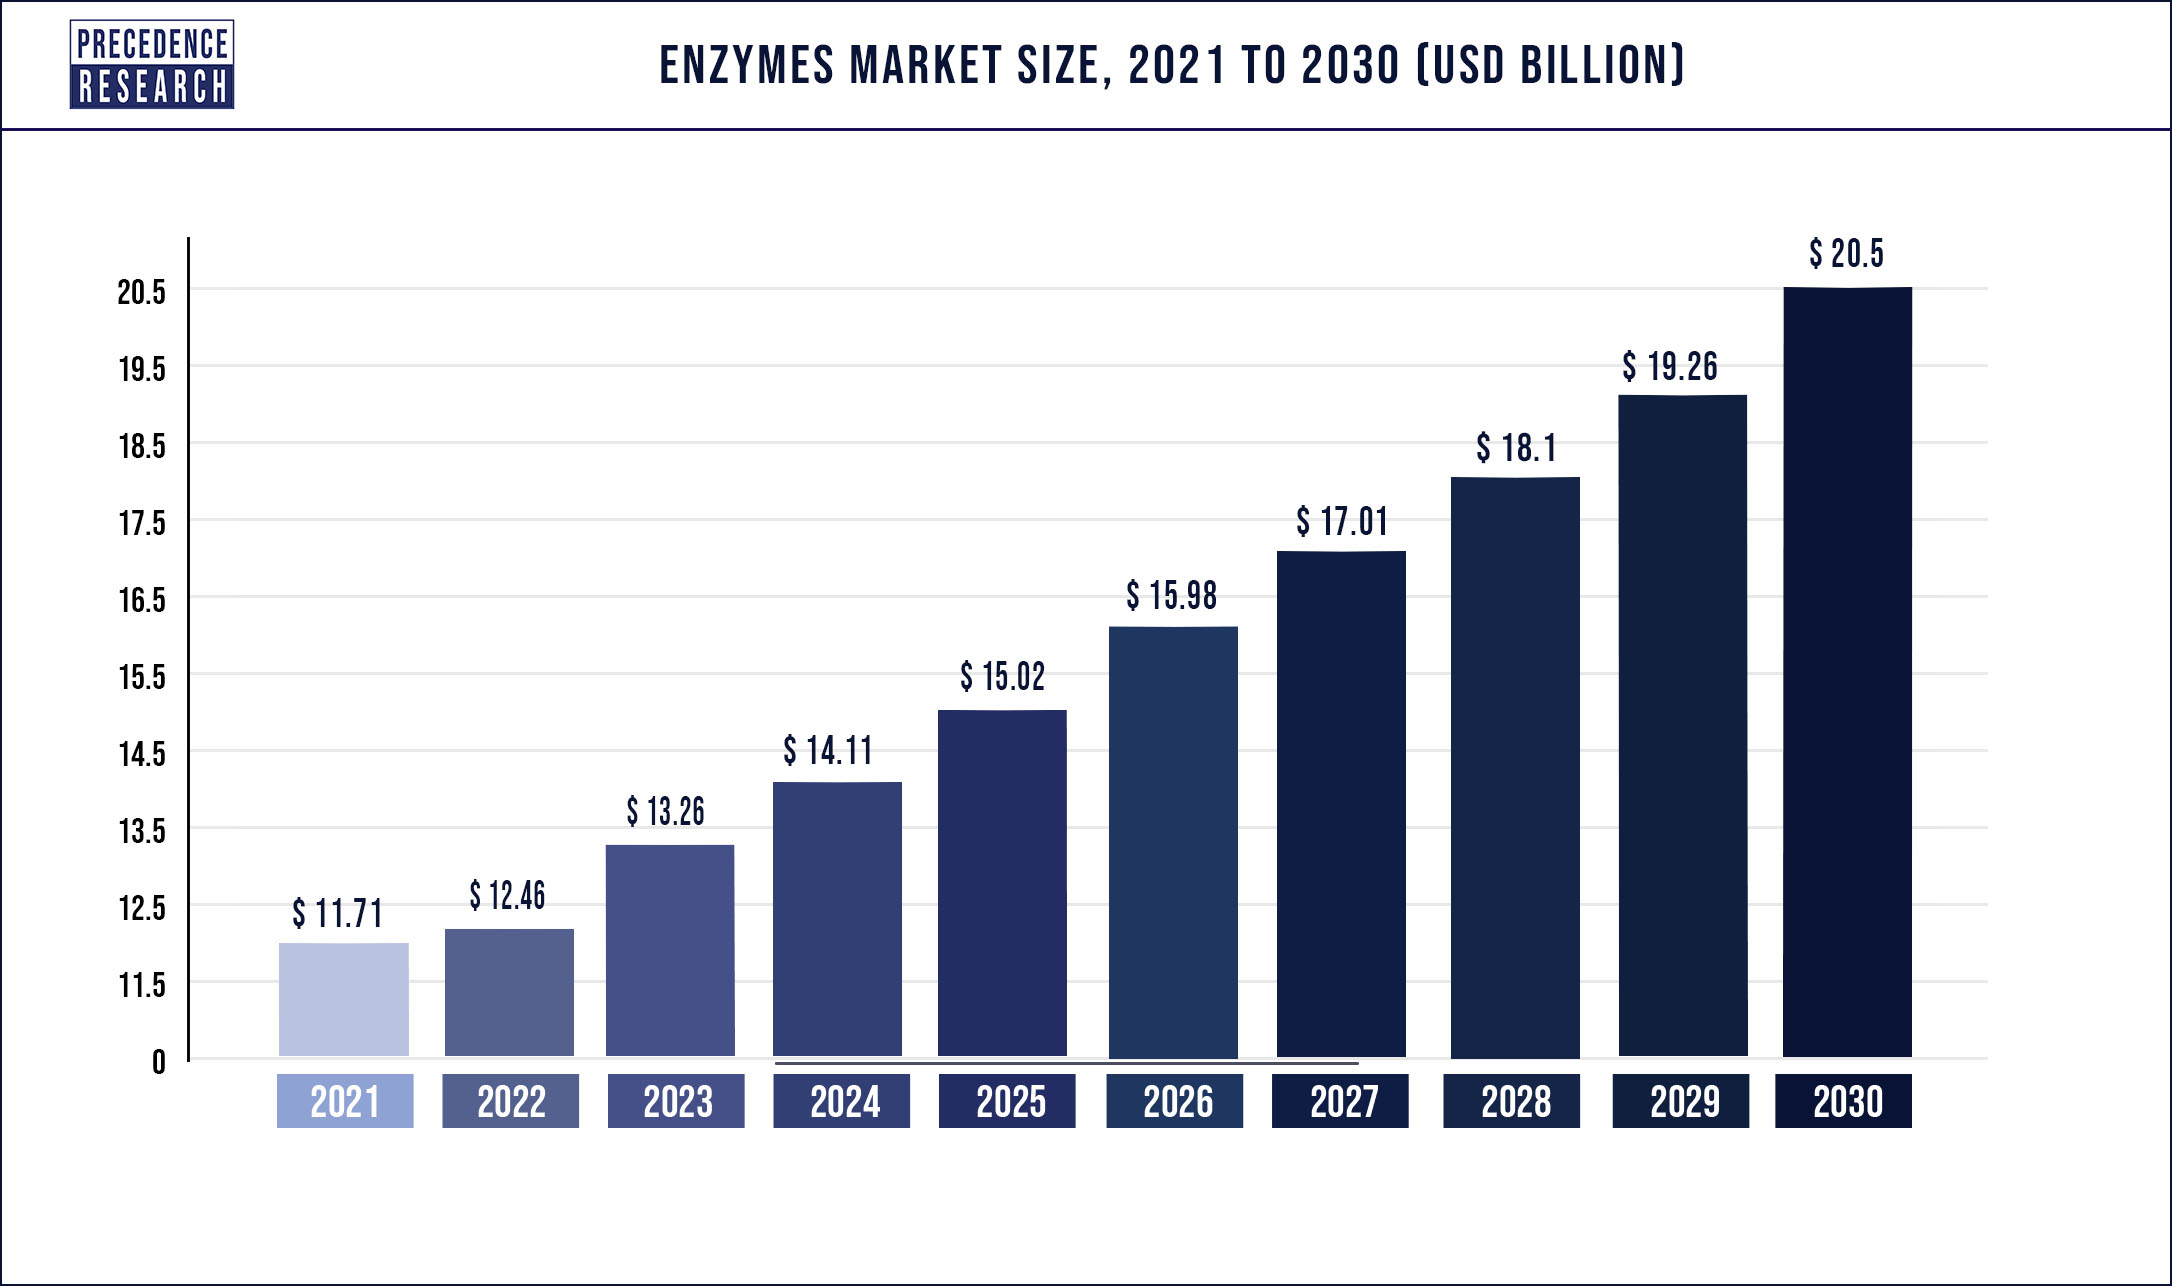 Enzymes Market Size is Forecasted to Reach US$ 20.5 Billion by 2030